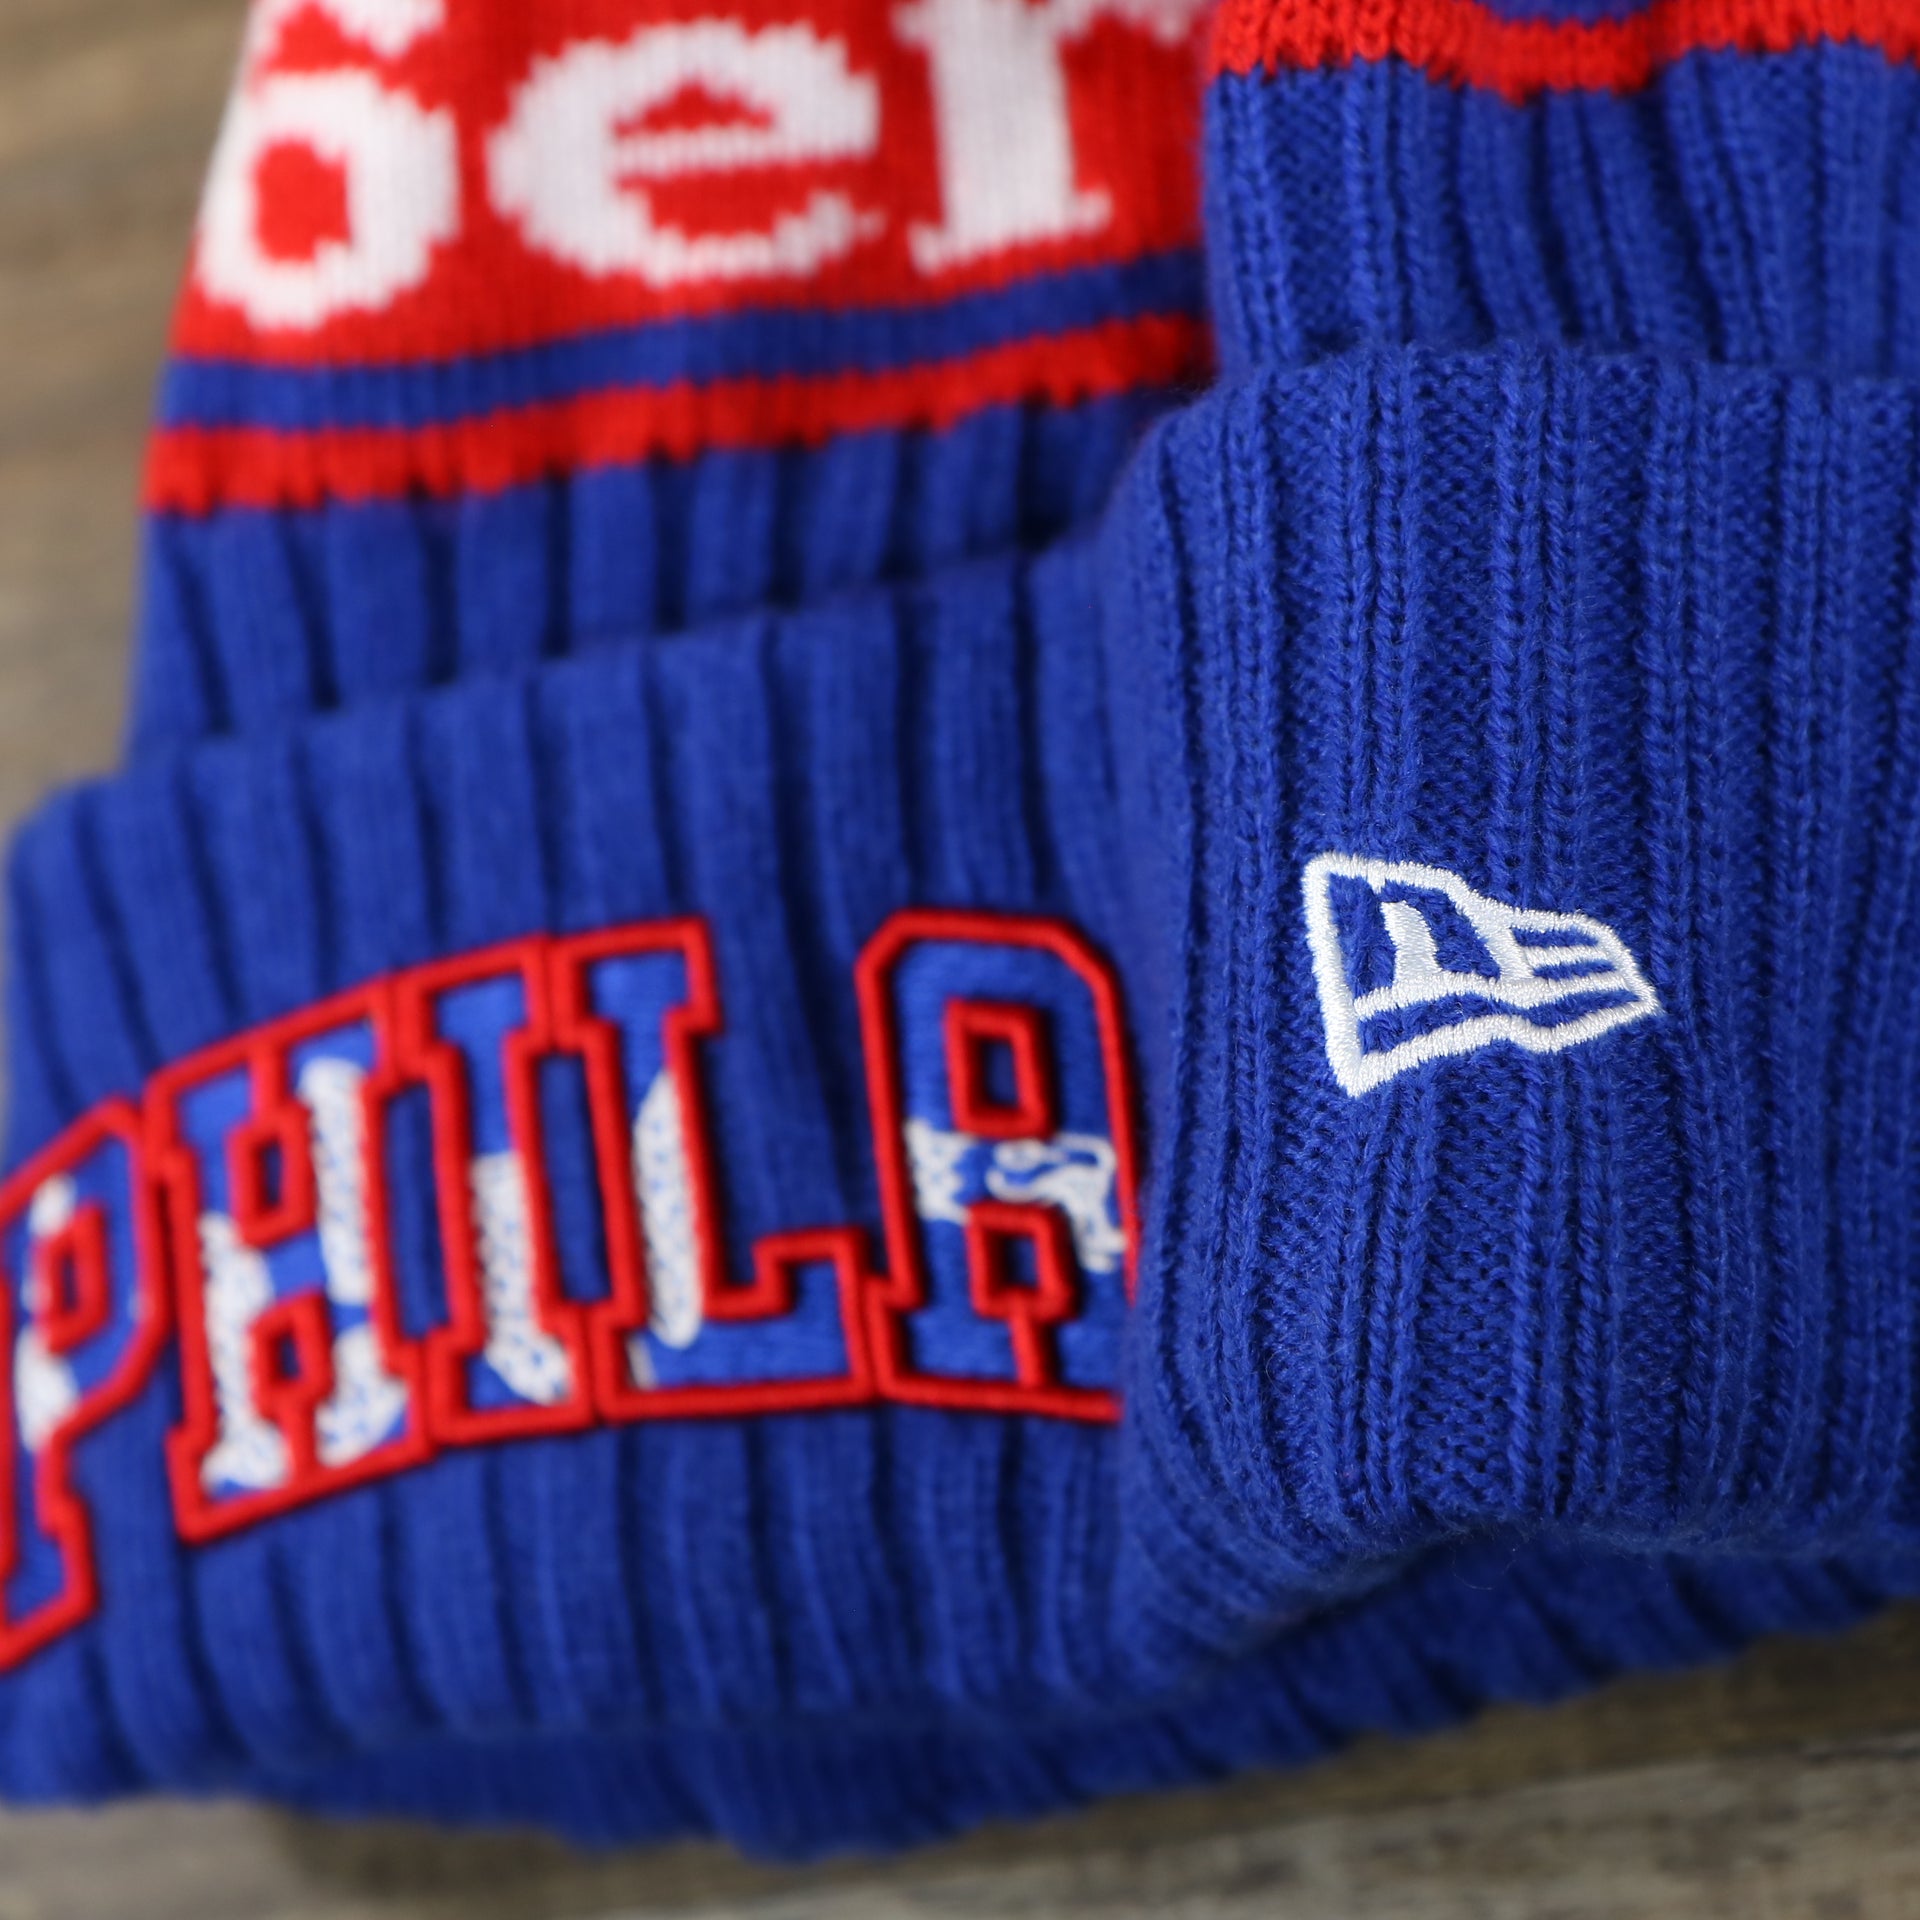 The New Era Logo on the Philadelphia 76ers Knit Wordmark Phila Arch Lettering Join Or Die Snake NBA Draft Striped Beanie | Royal Blue and Red Beanie